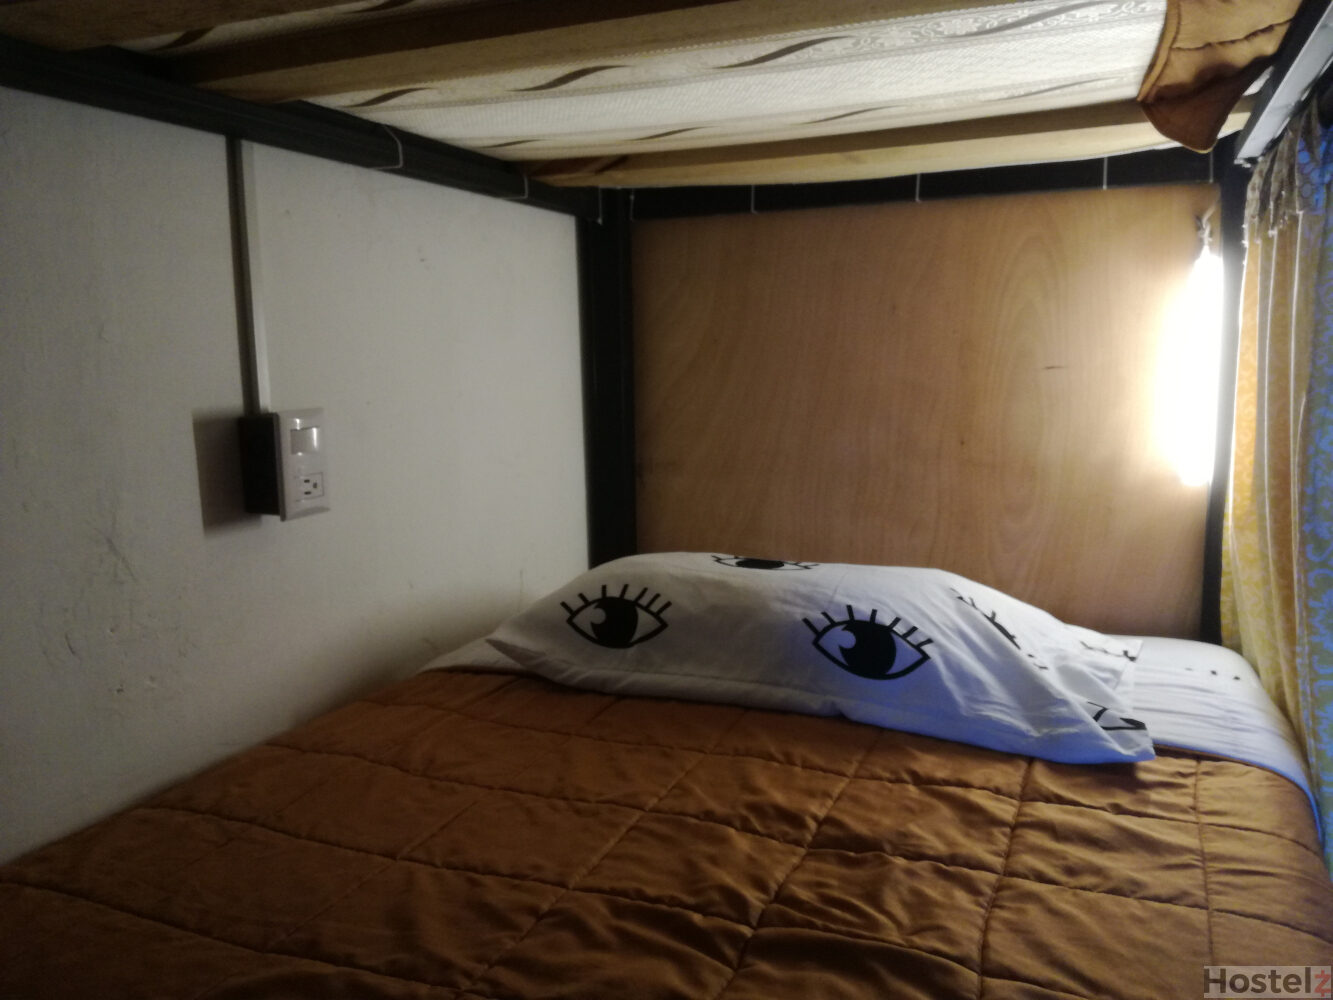 Bunk with light and electrical outlet